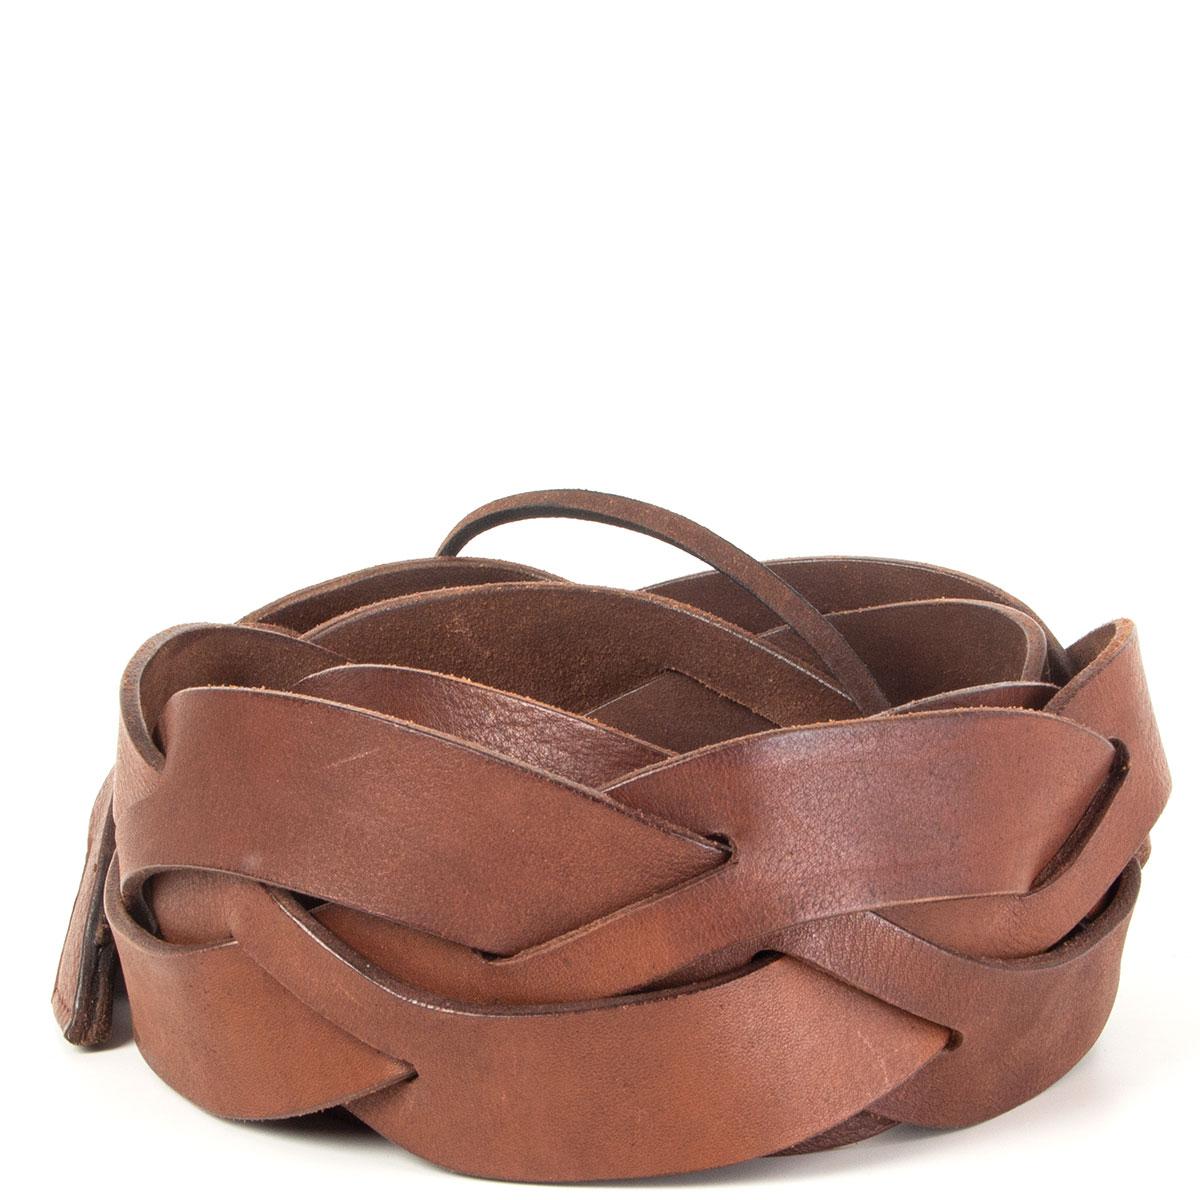 Ralph Lauren braided waist-belt in brown calfskin with faux horn buckle. Has been worn and is in excellent condition.

Tag Size OS
Width 8cm (3.1in)
Length 124cm (48.4in)